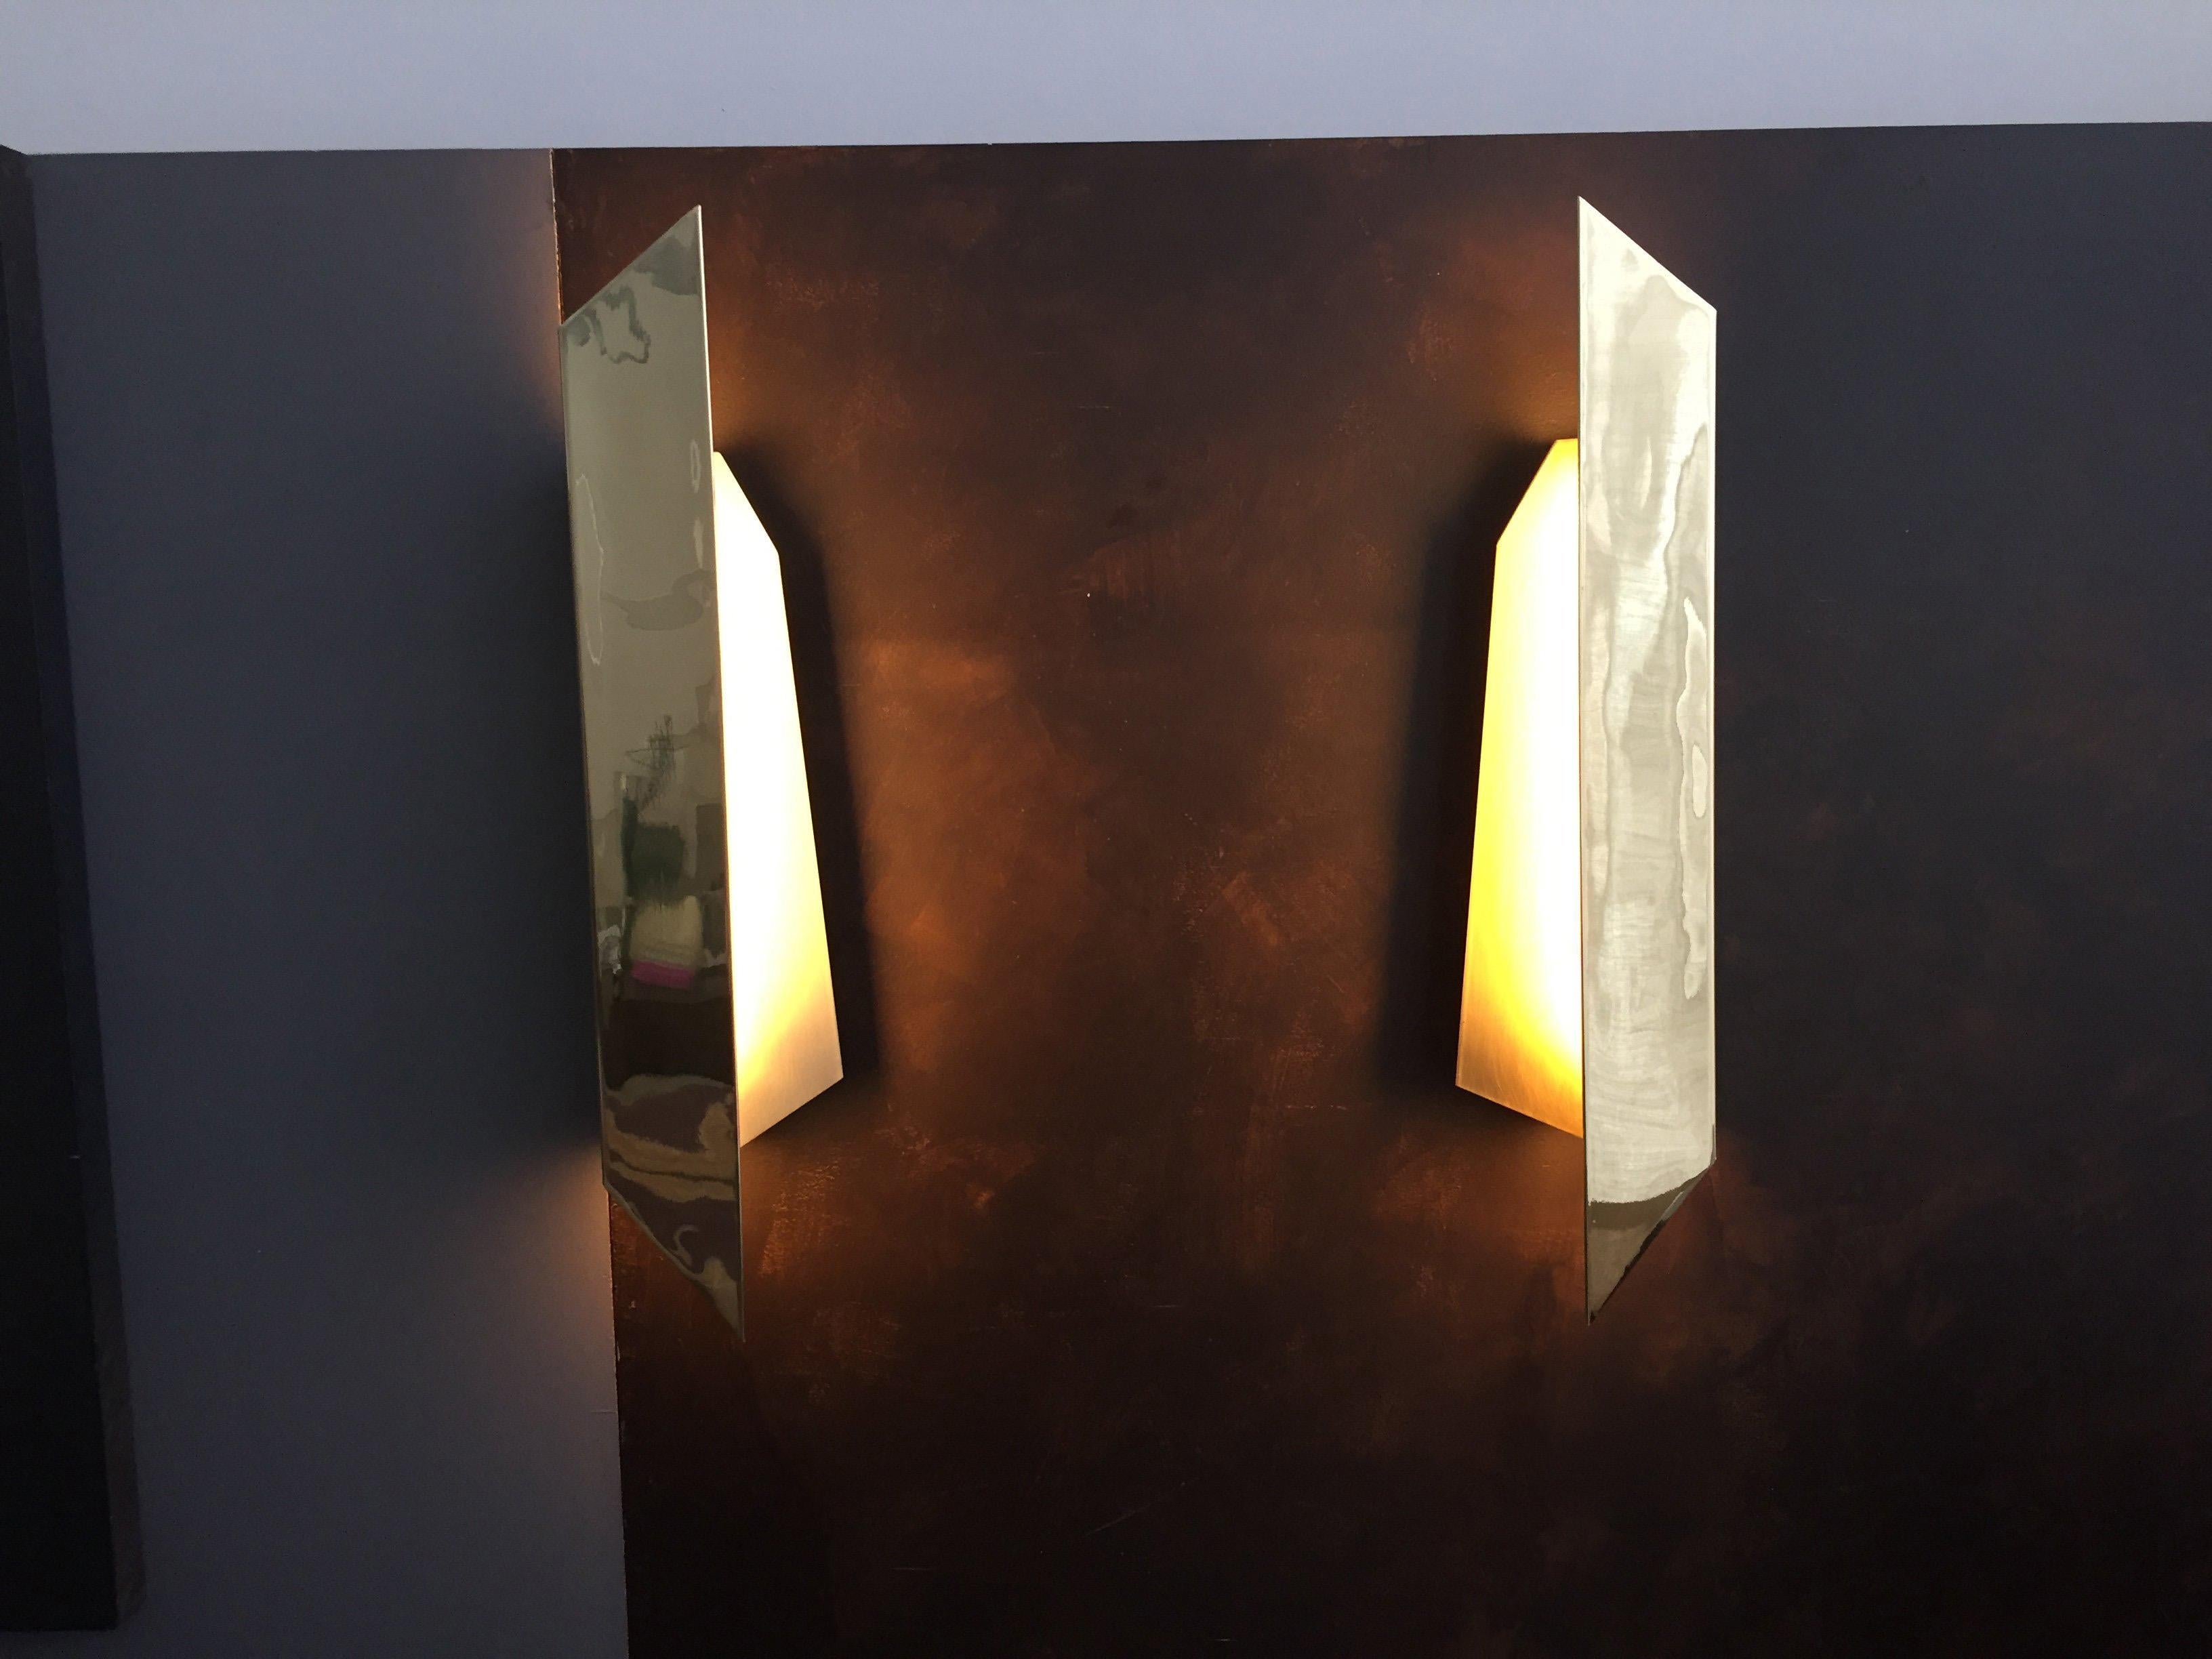 Polished brass / satin brass / clear coated brass / glass

Contemporary brass wall lamp inspired by an airplane toy, made on child age using paper. Polished satin clear and coated brass, glass and led light.